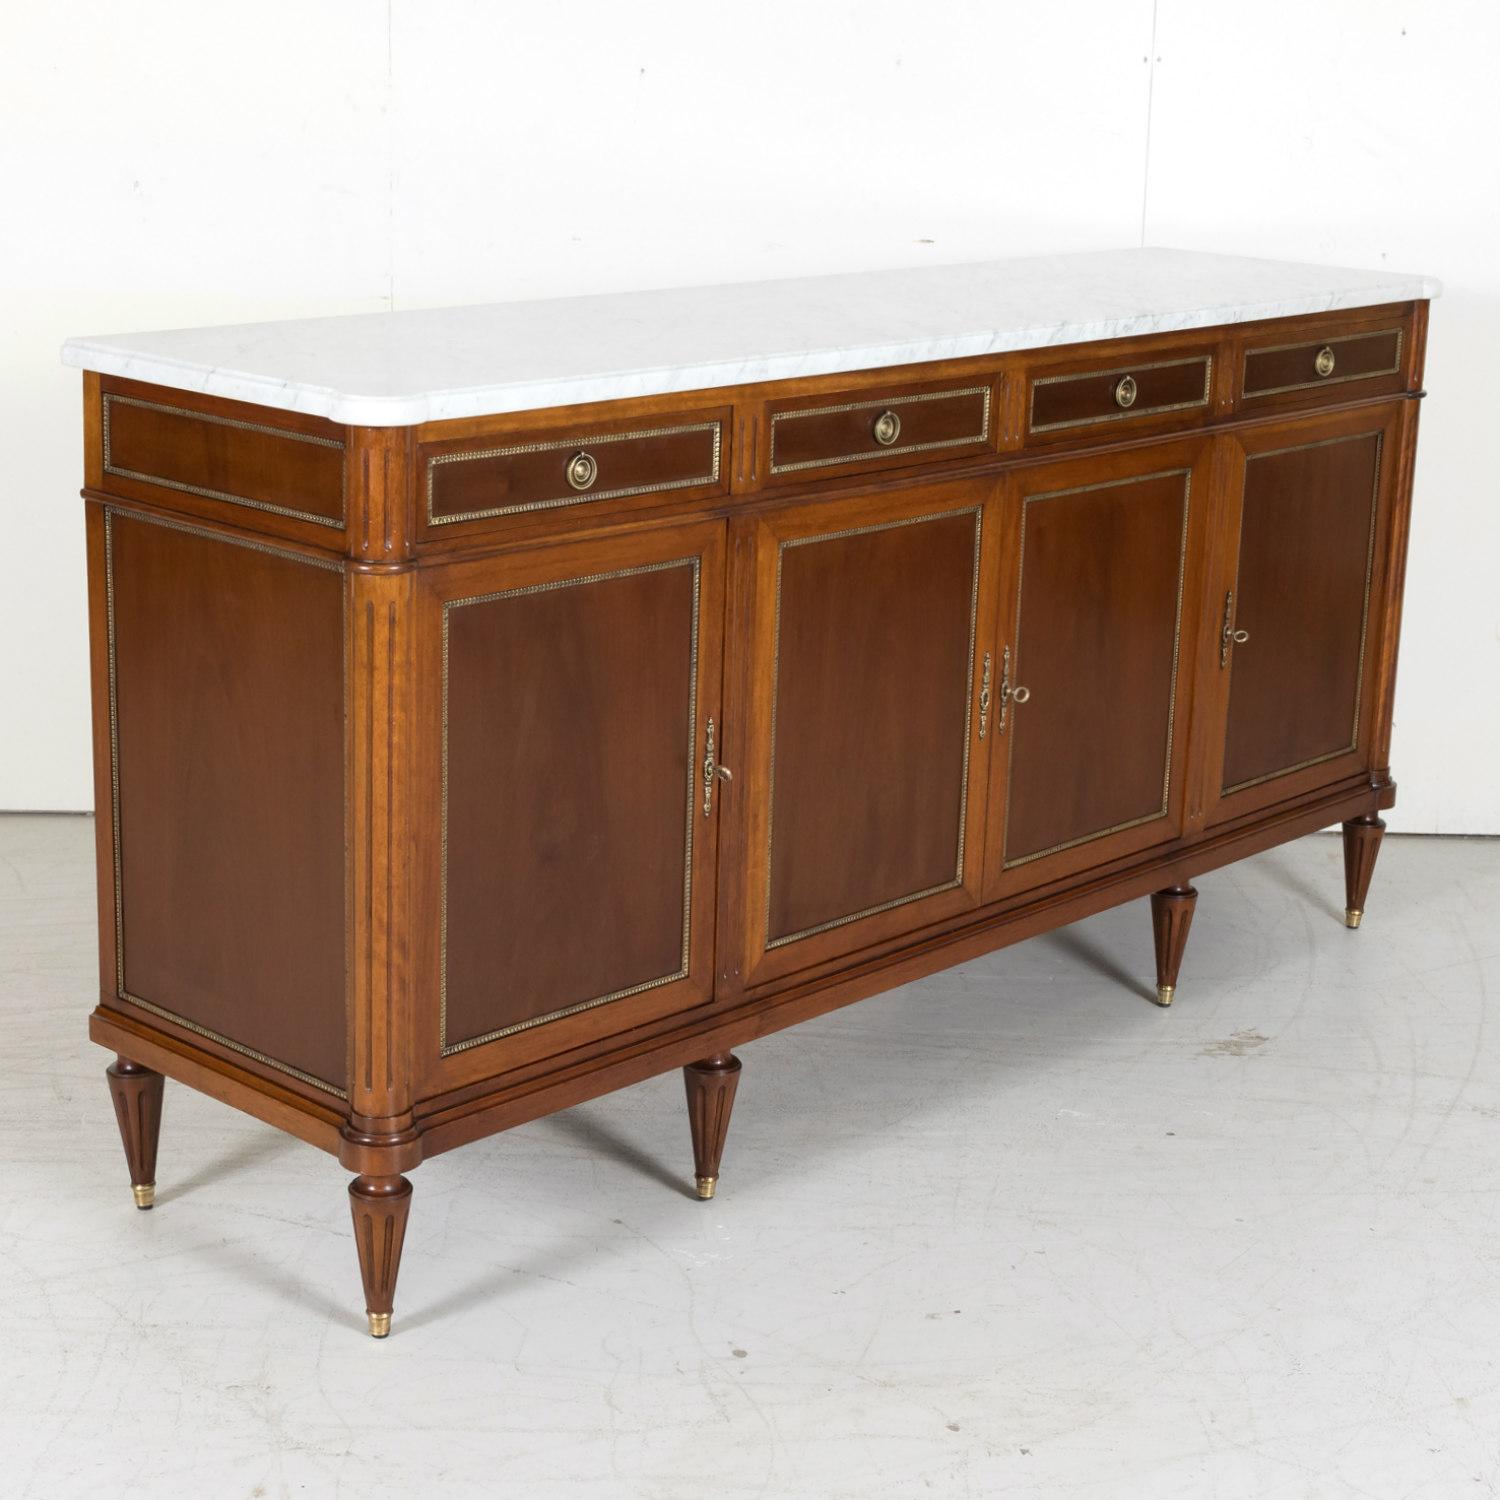 Early 20th century French Louis XVI style enfilade buffet handcrafted of mahogany by skilled craftsmen near Paris, circa 1900. Having a white molded Carrara marble top with cookie cutter corners over four drawers and four paneled doors, all with